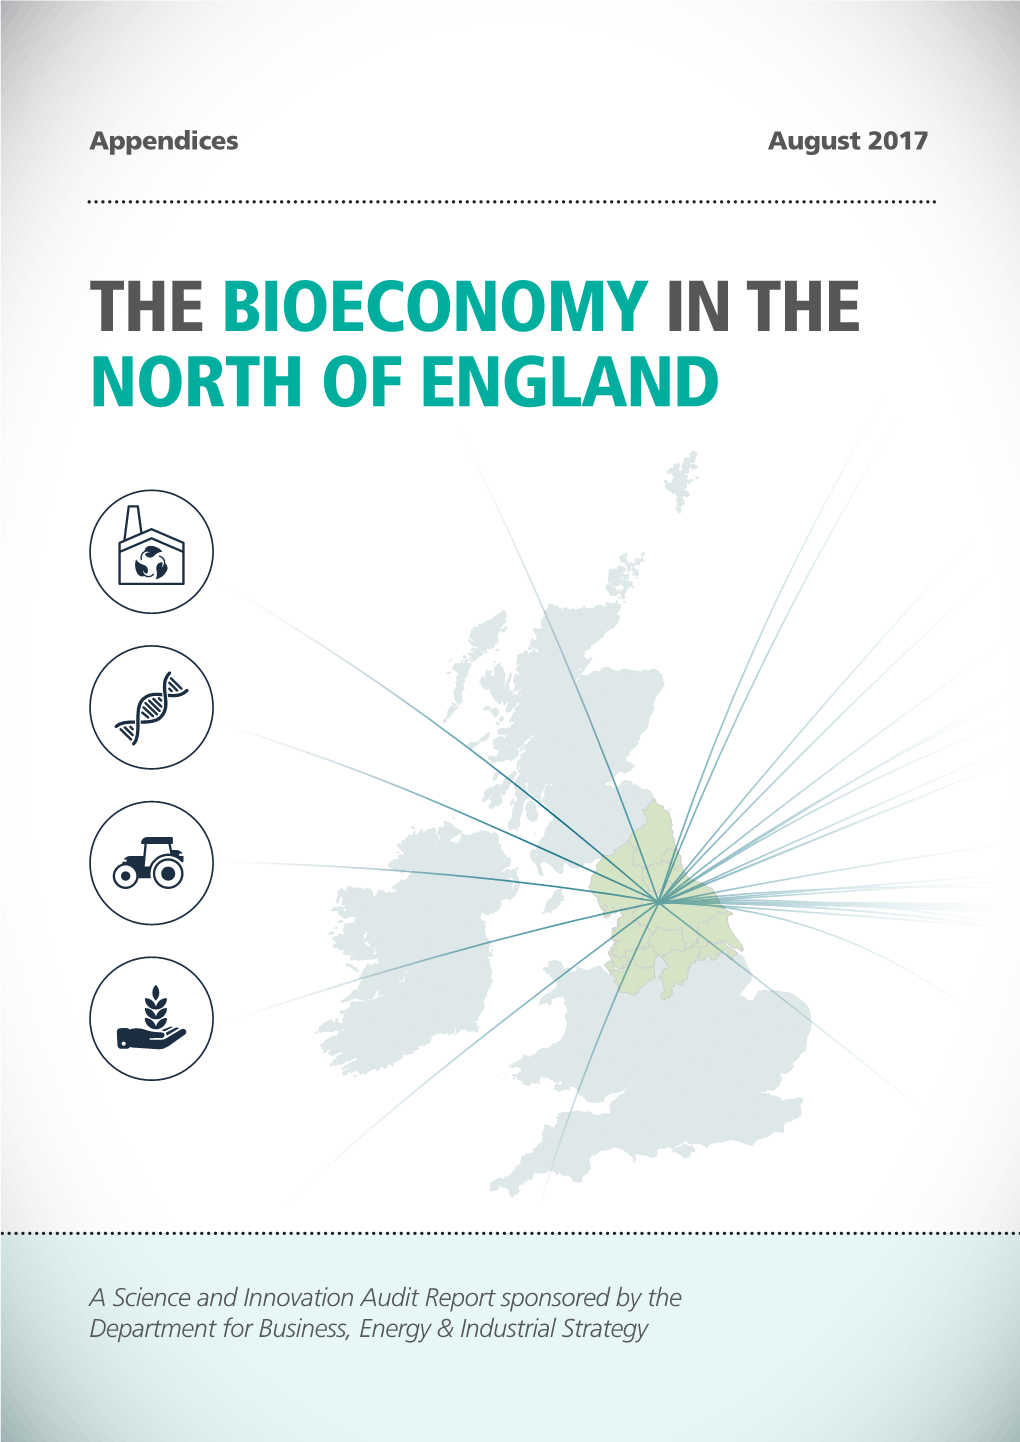 The Bioeconomy in the North of England